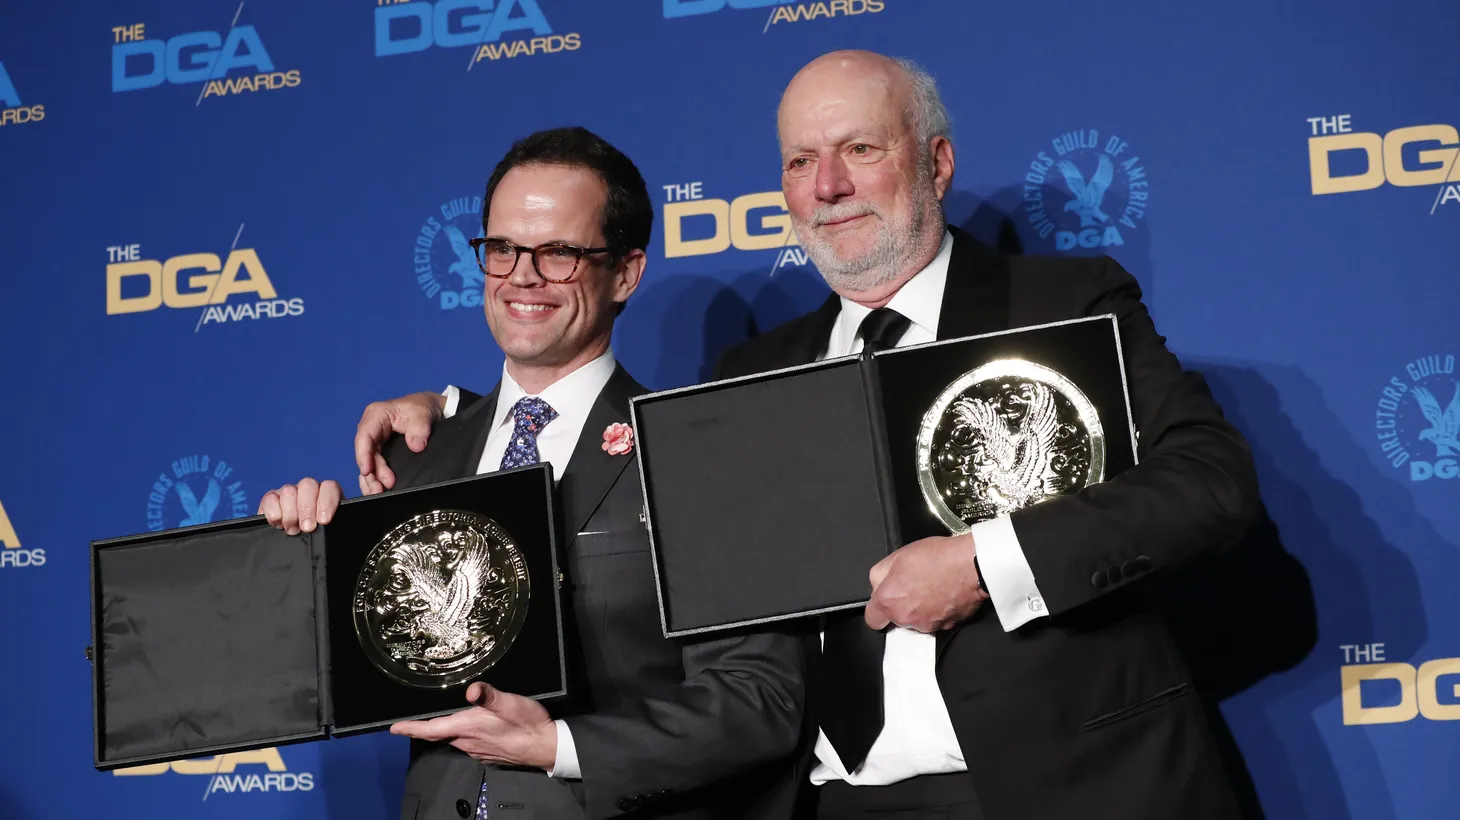 Andy Fisher (L) and James Burrows, directors of “Live in Front of a Studio Audience Norman Lear's All in the Family & The Jeffersons” pose with their medallions after winning for Outstanding Directorial Achievement in Variety/Talk/News/Sports at the 72nd Annual Directors Guild Awards in Los Angeles, on January 25, 2020.